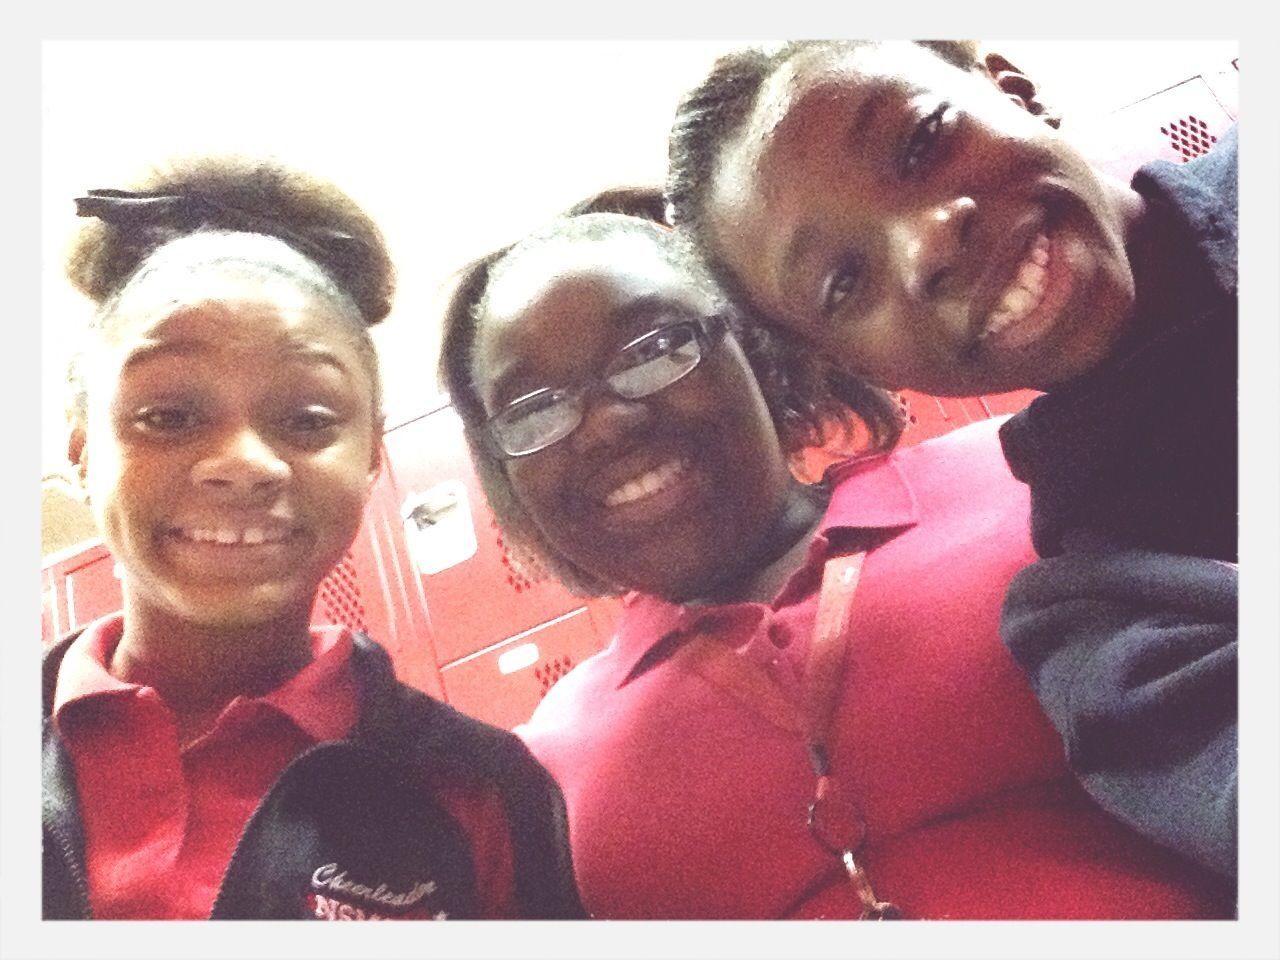 Me cereniti and essence in the locker room